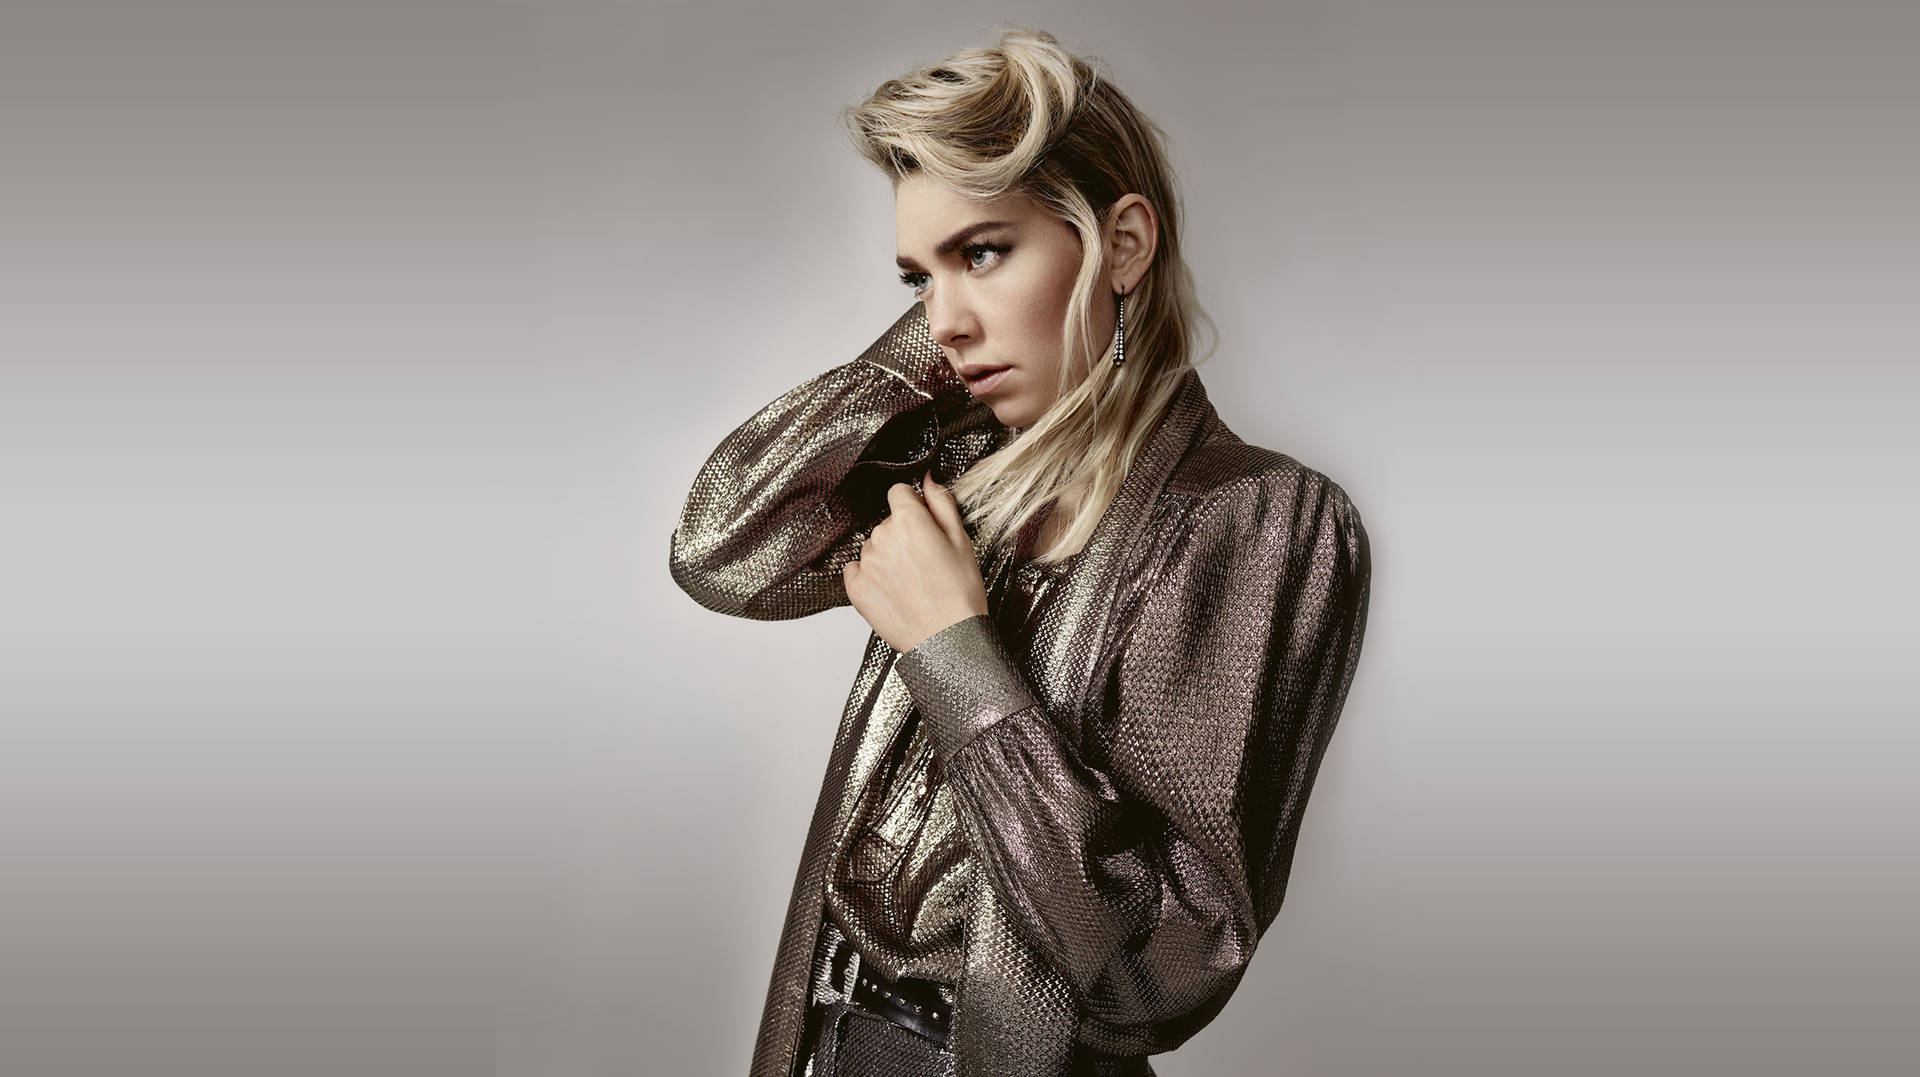 Vanessa Kirby In Metallic Outfit Background